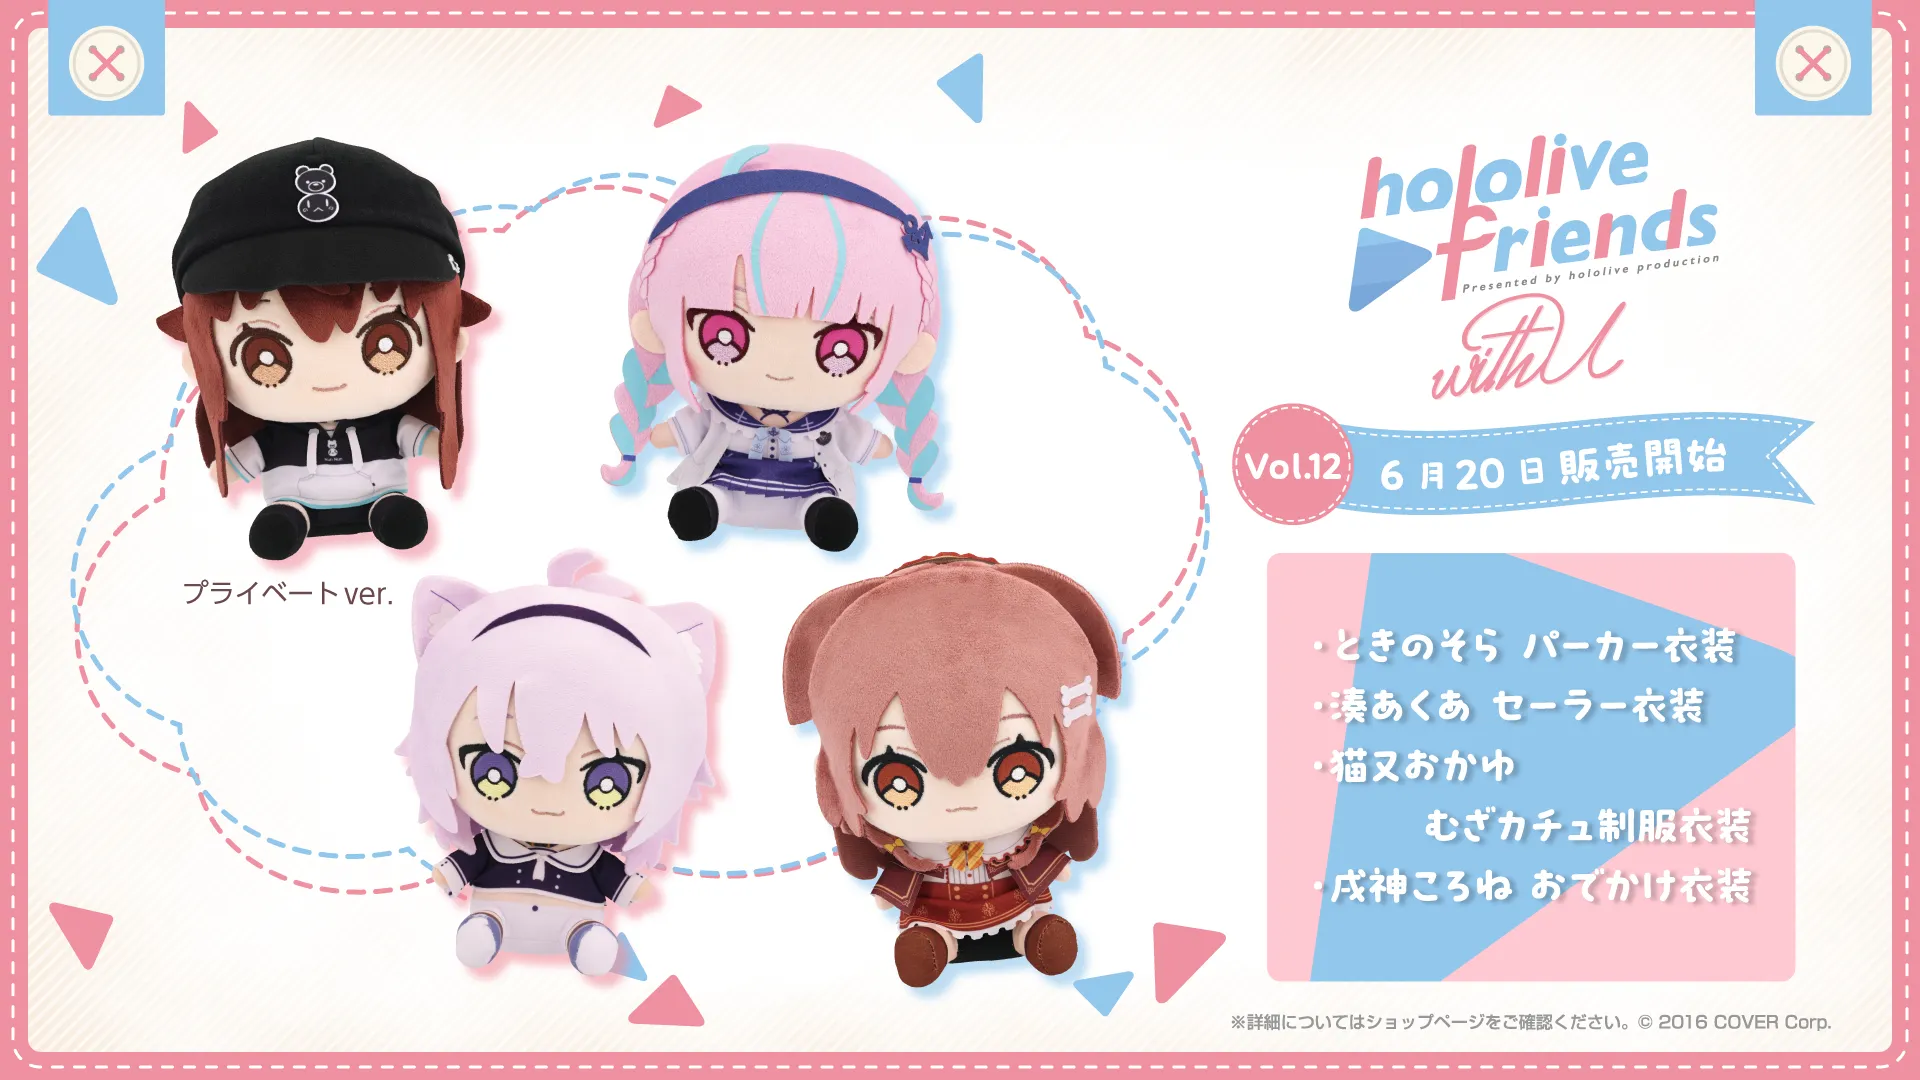 『hololive friends with u vol.12』が発売されました